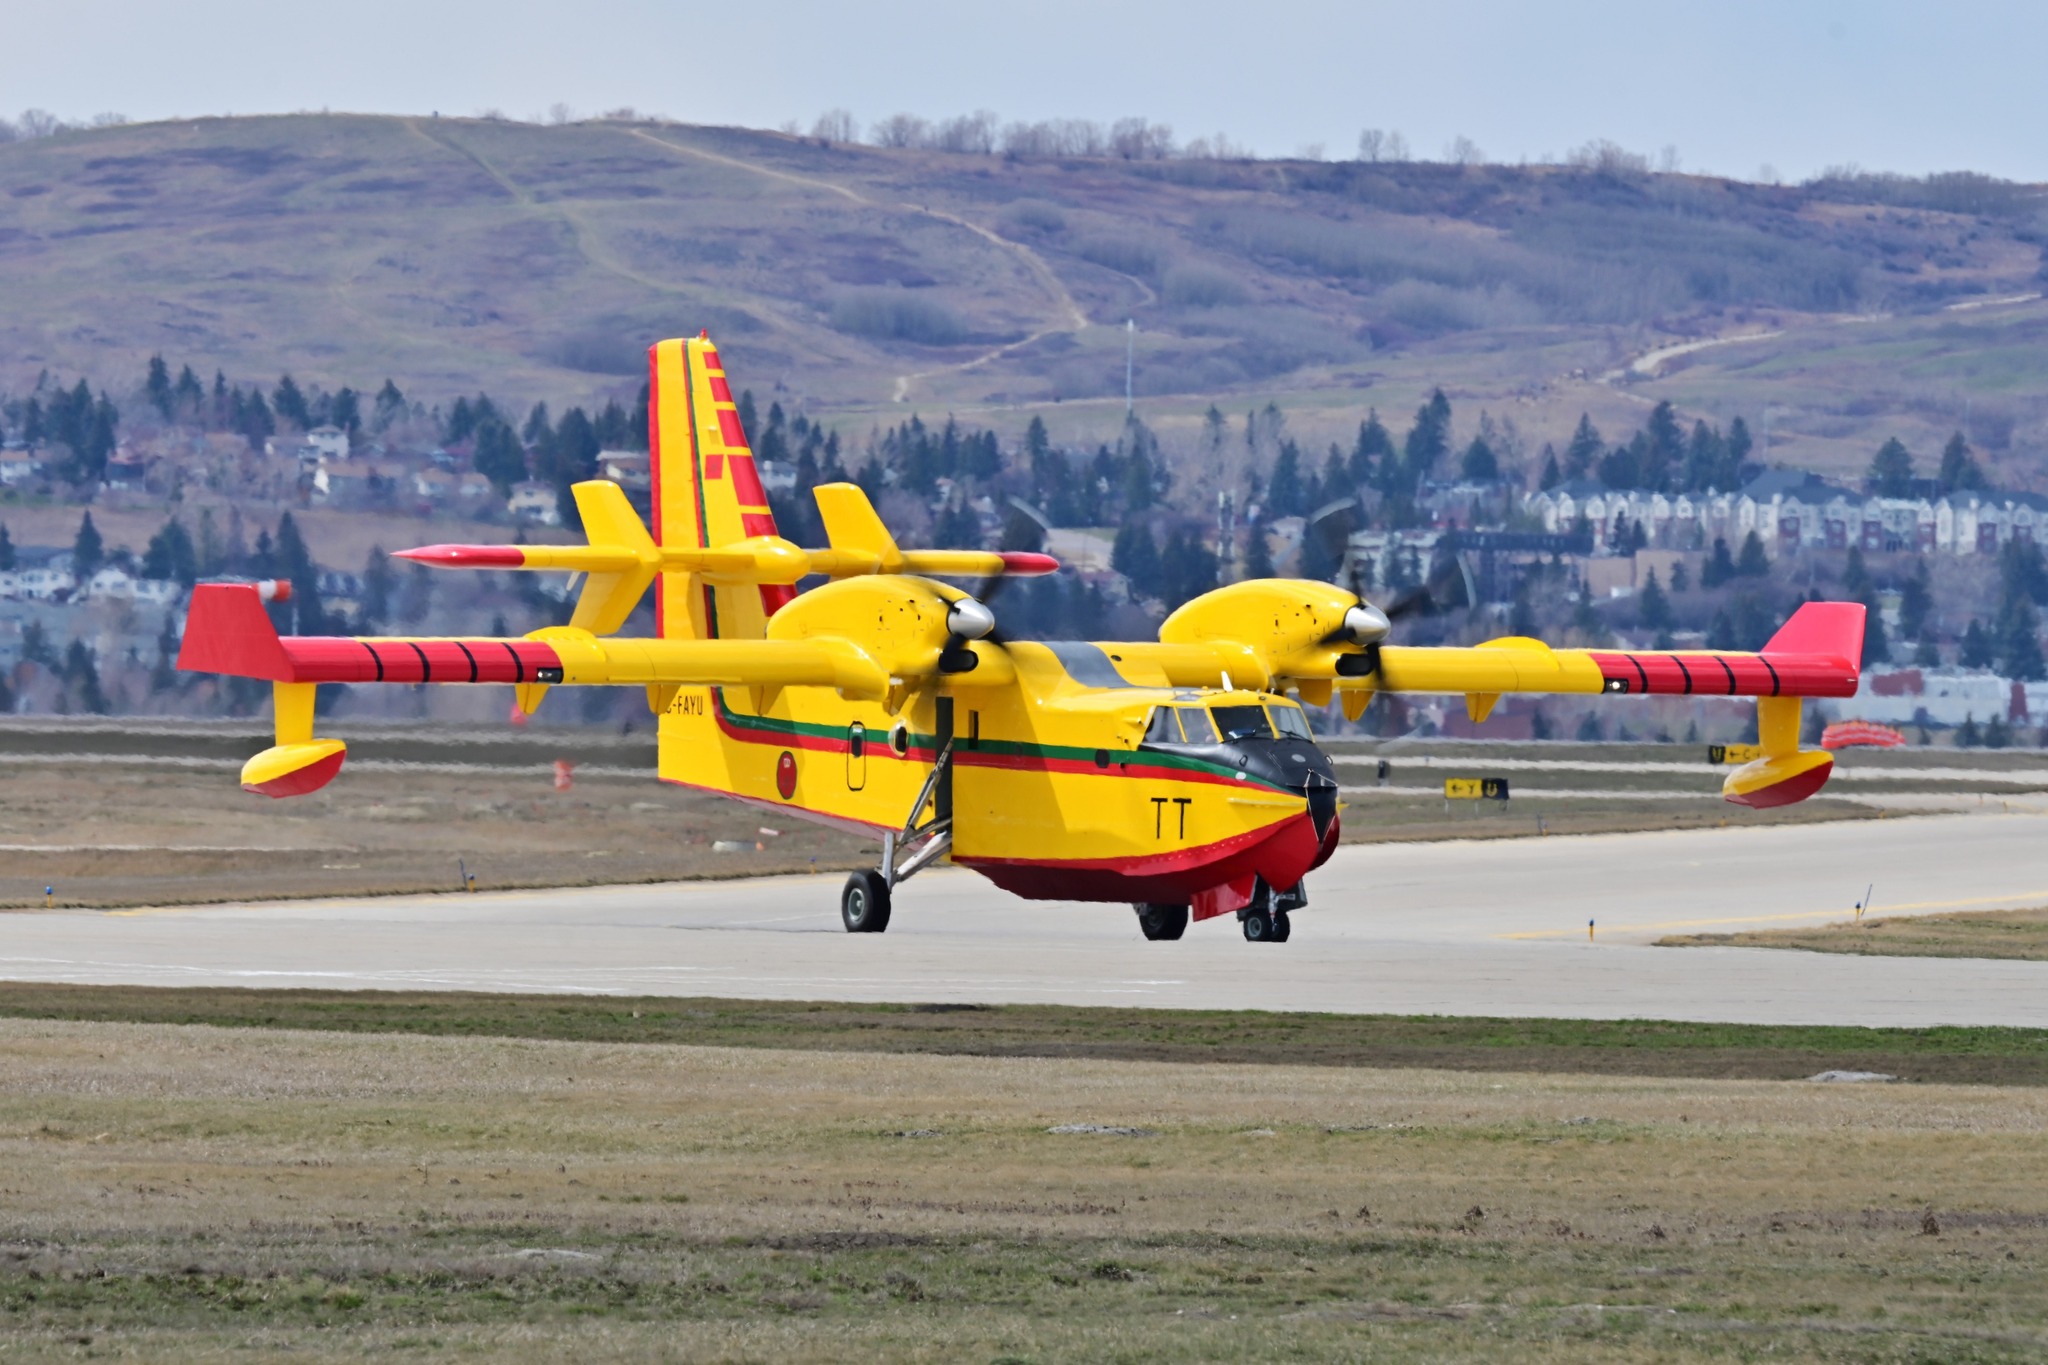 Canadair CL-415 - Page 14 01014